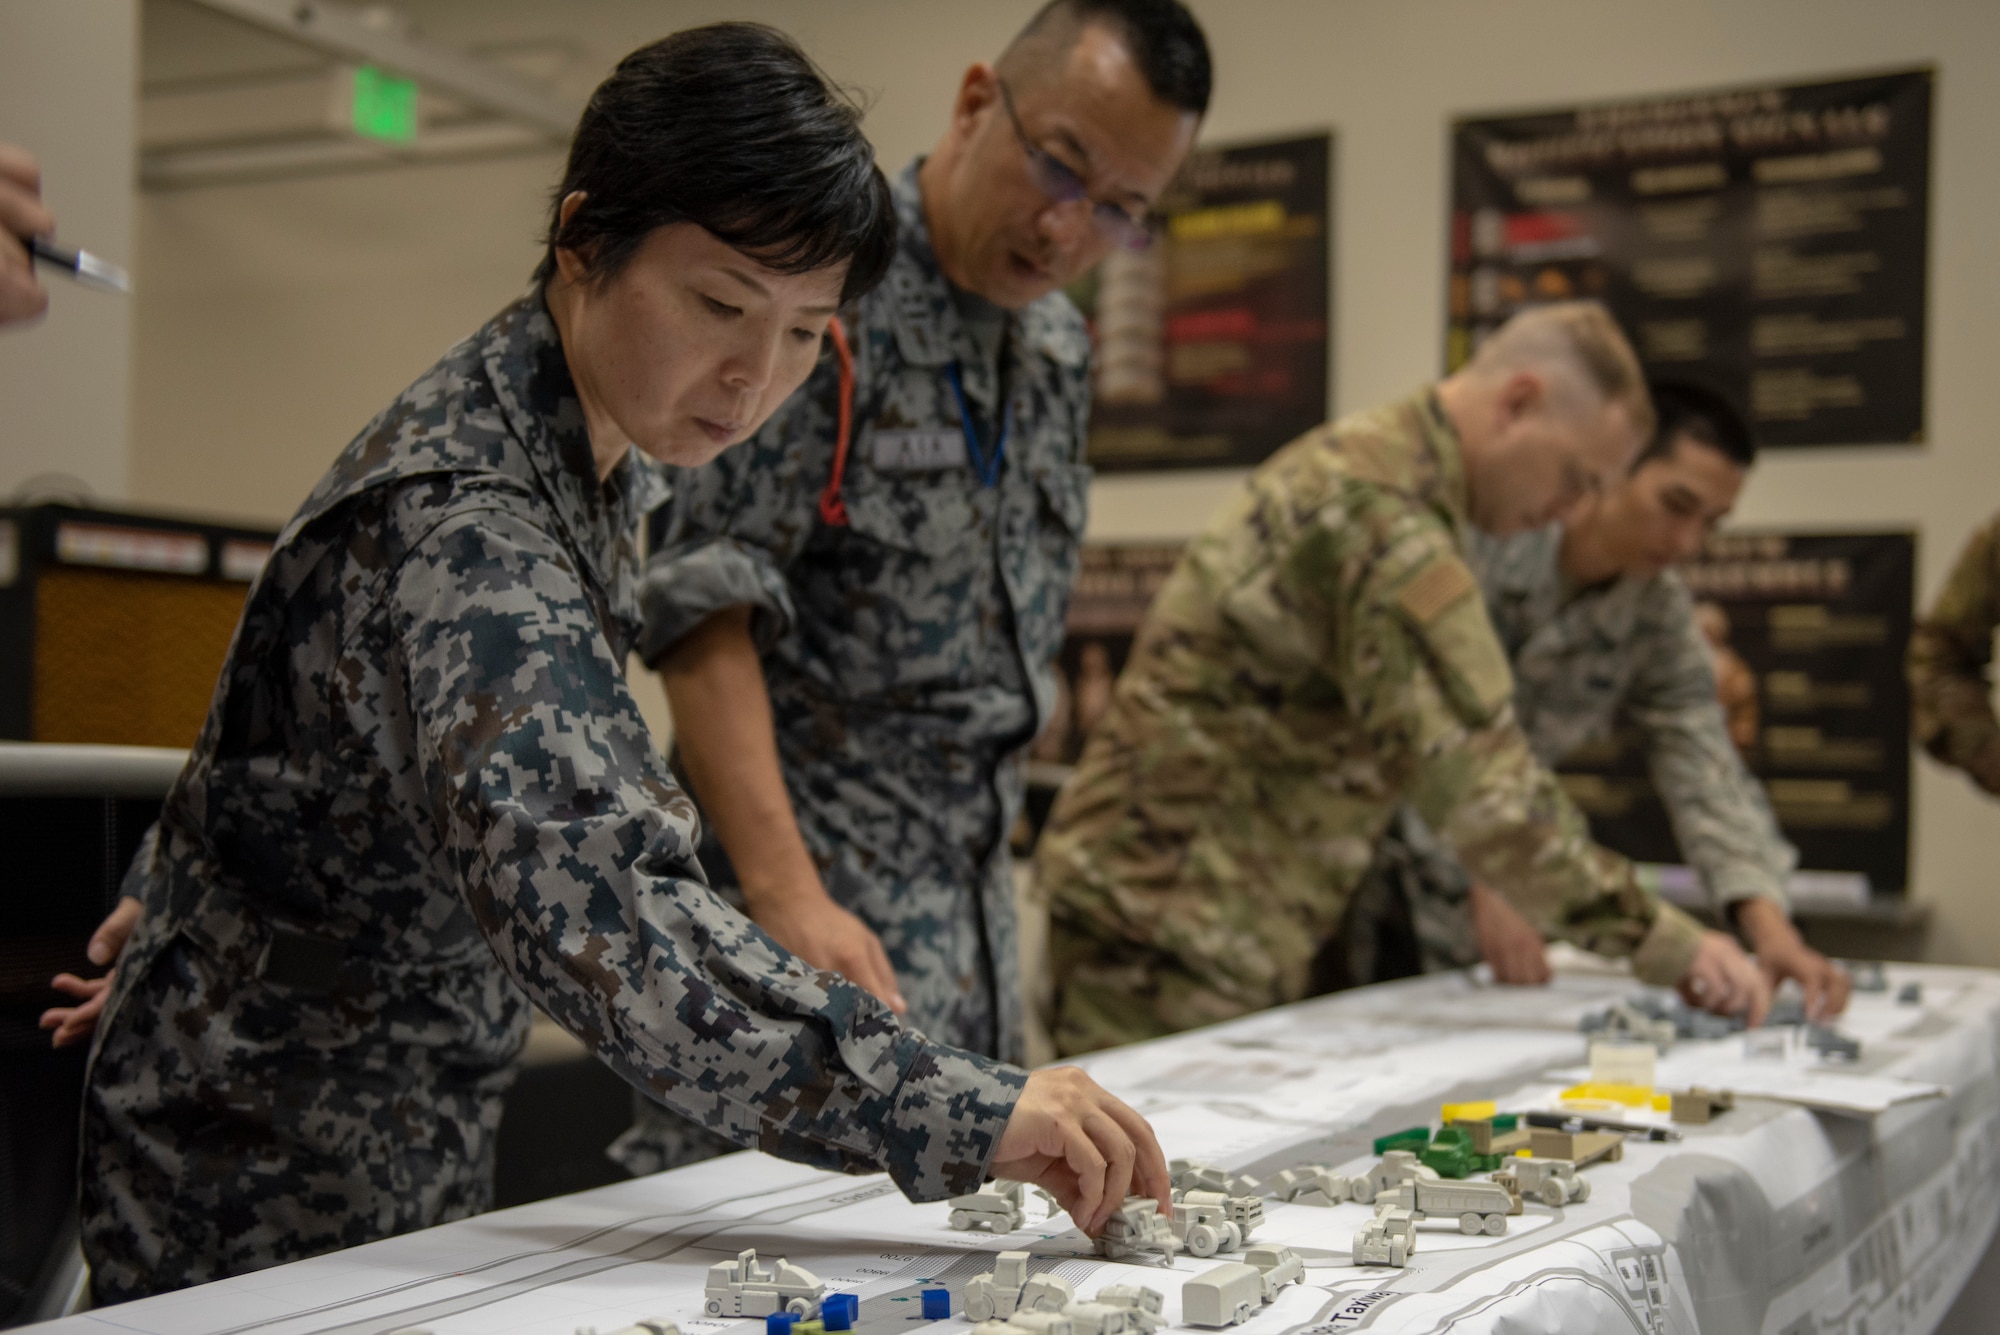 Japan Air Self-Defense Force and U.S. Air Force service members take part in the table top portion of Pacific Unity 2019 at Yokota Air Base, Japan, August 21, 2019.